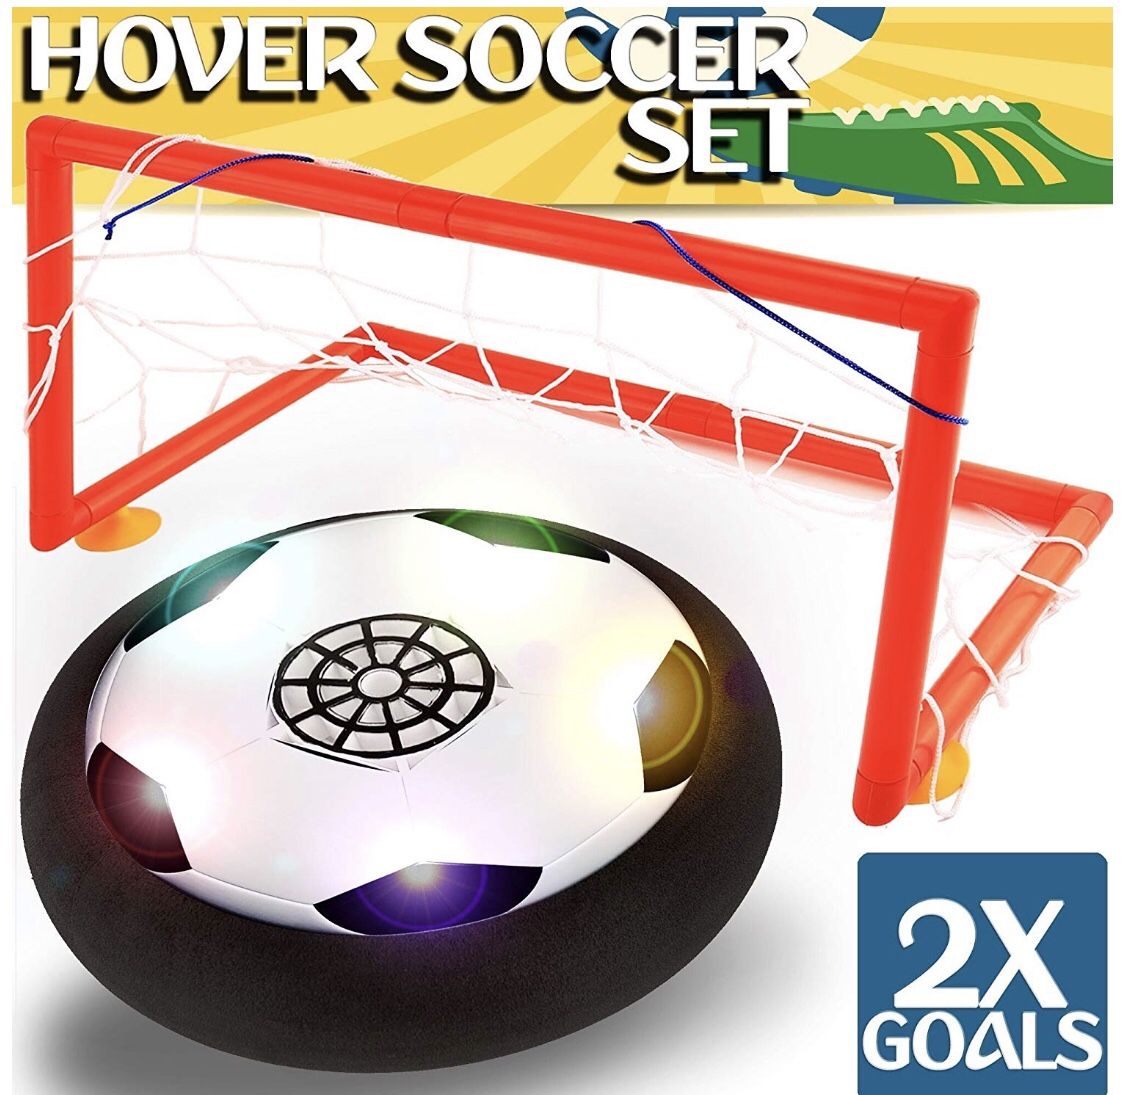 Kids Toys - Air Power Soccer Set with 2 Goals,Warmstore Boys Girls Sport Toys Training Football Indoor Outdoor Disk Hover Ball Game with LED Light Up